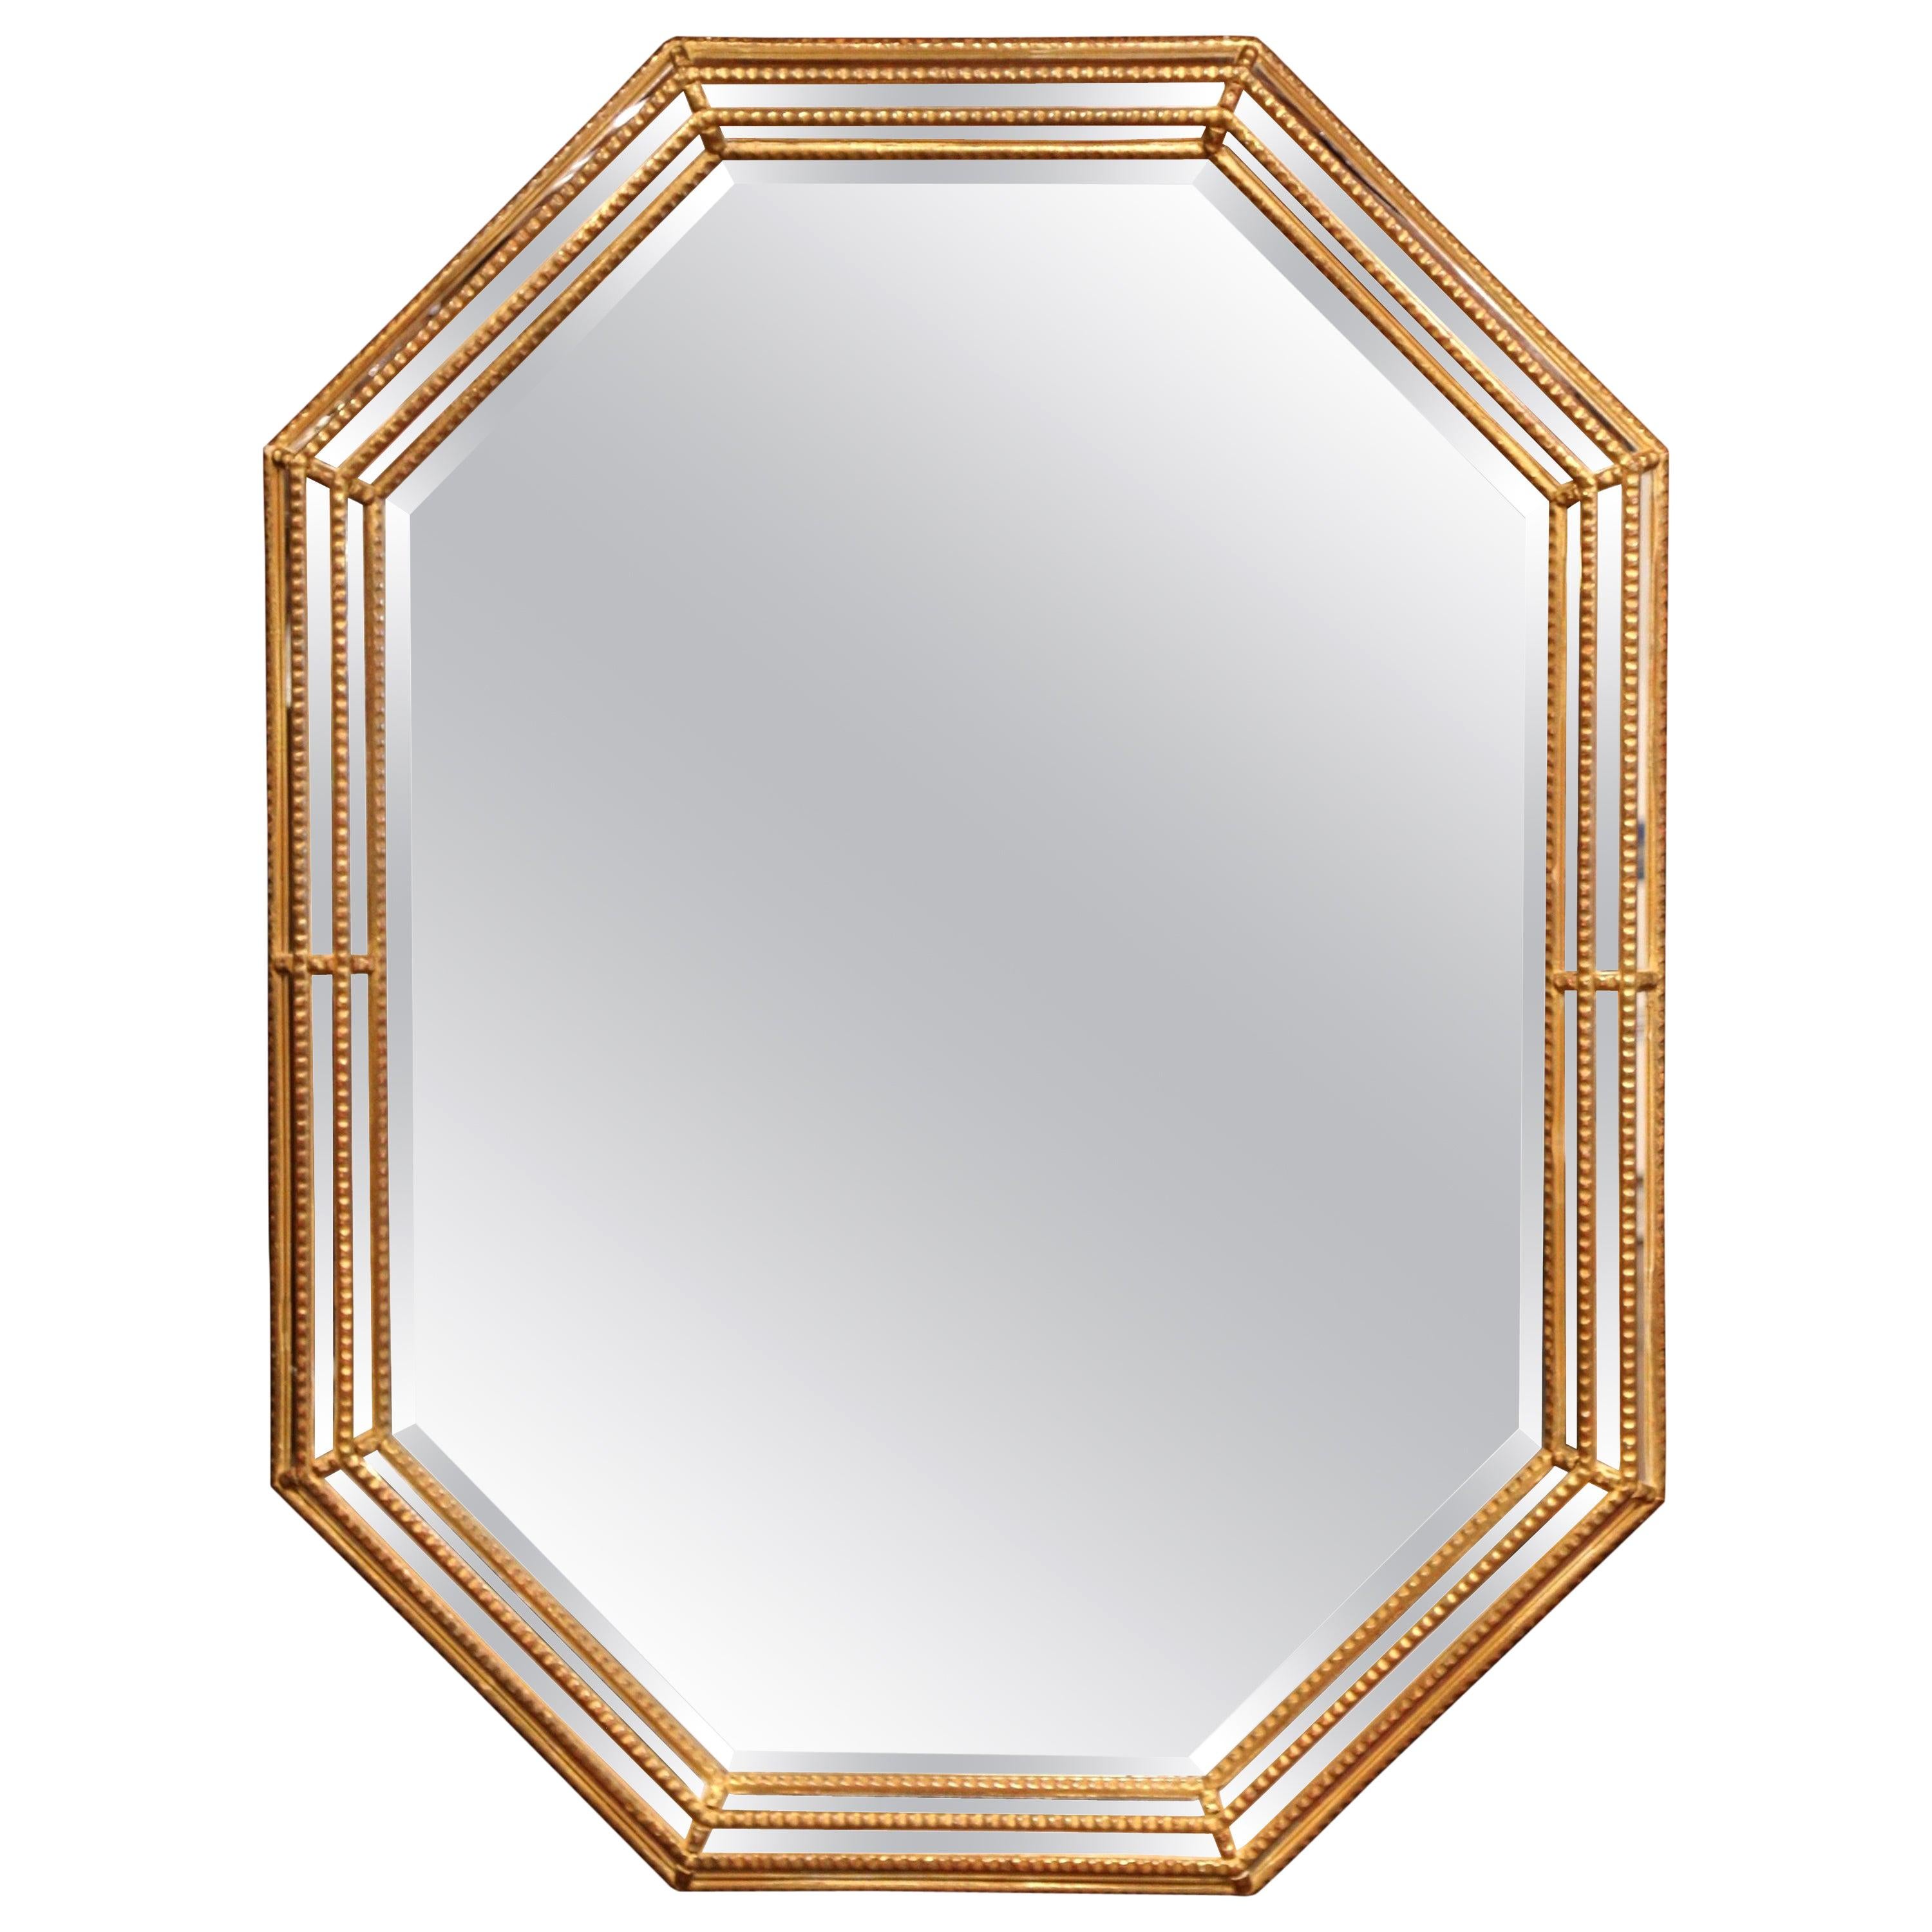 Early 20th Century French Louis XVI Octagonal Carved Giltwood Wall Mirror